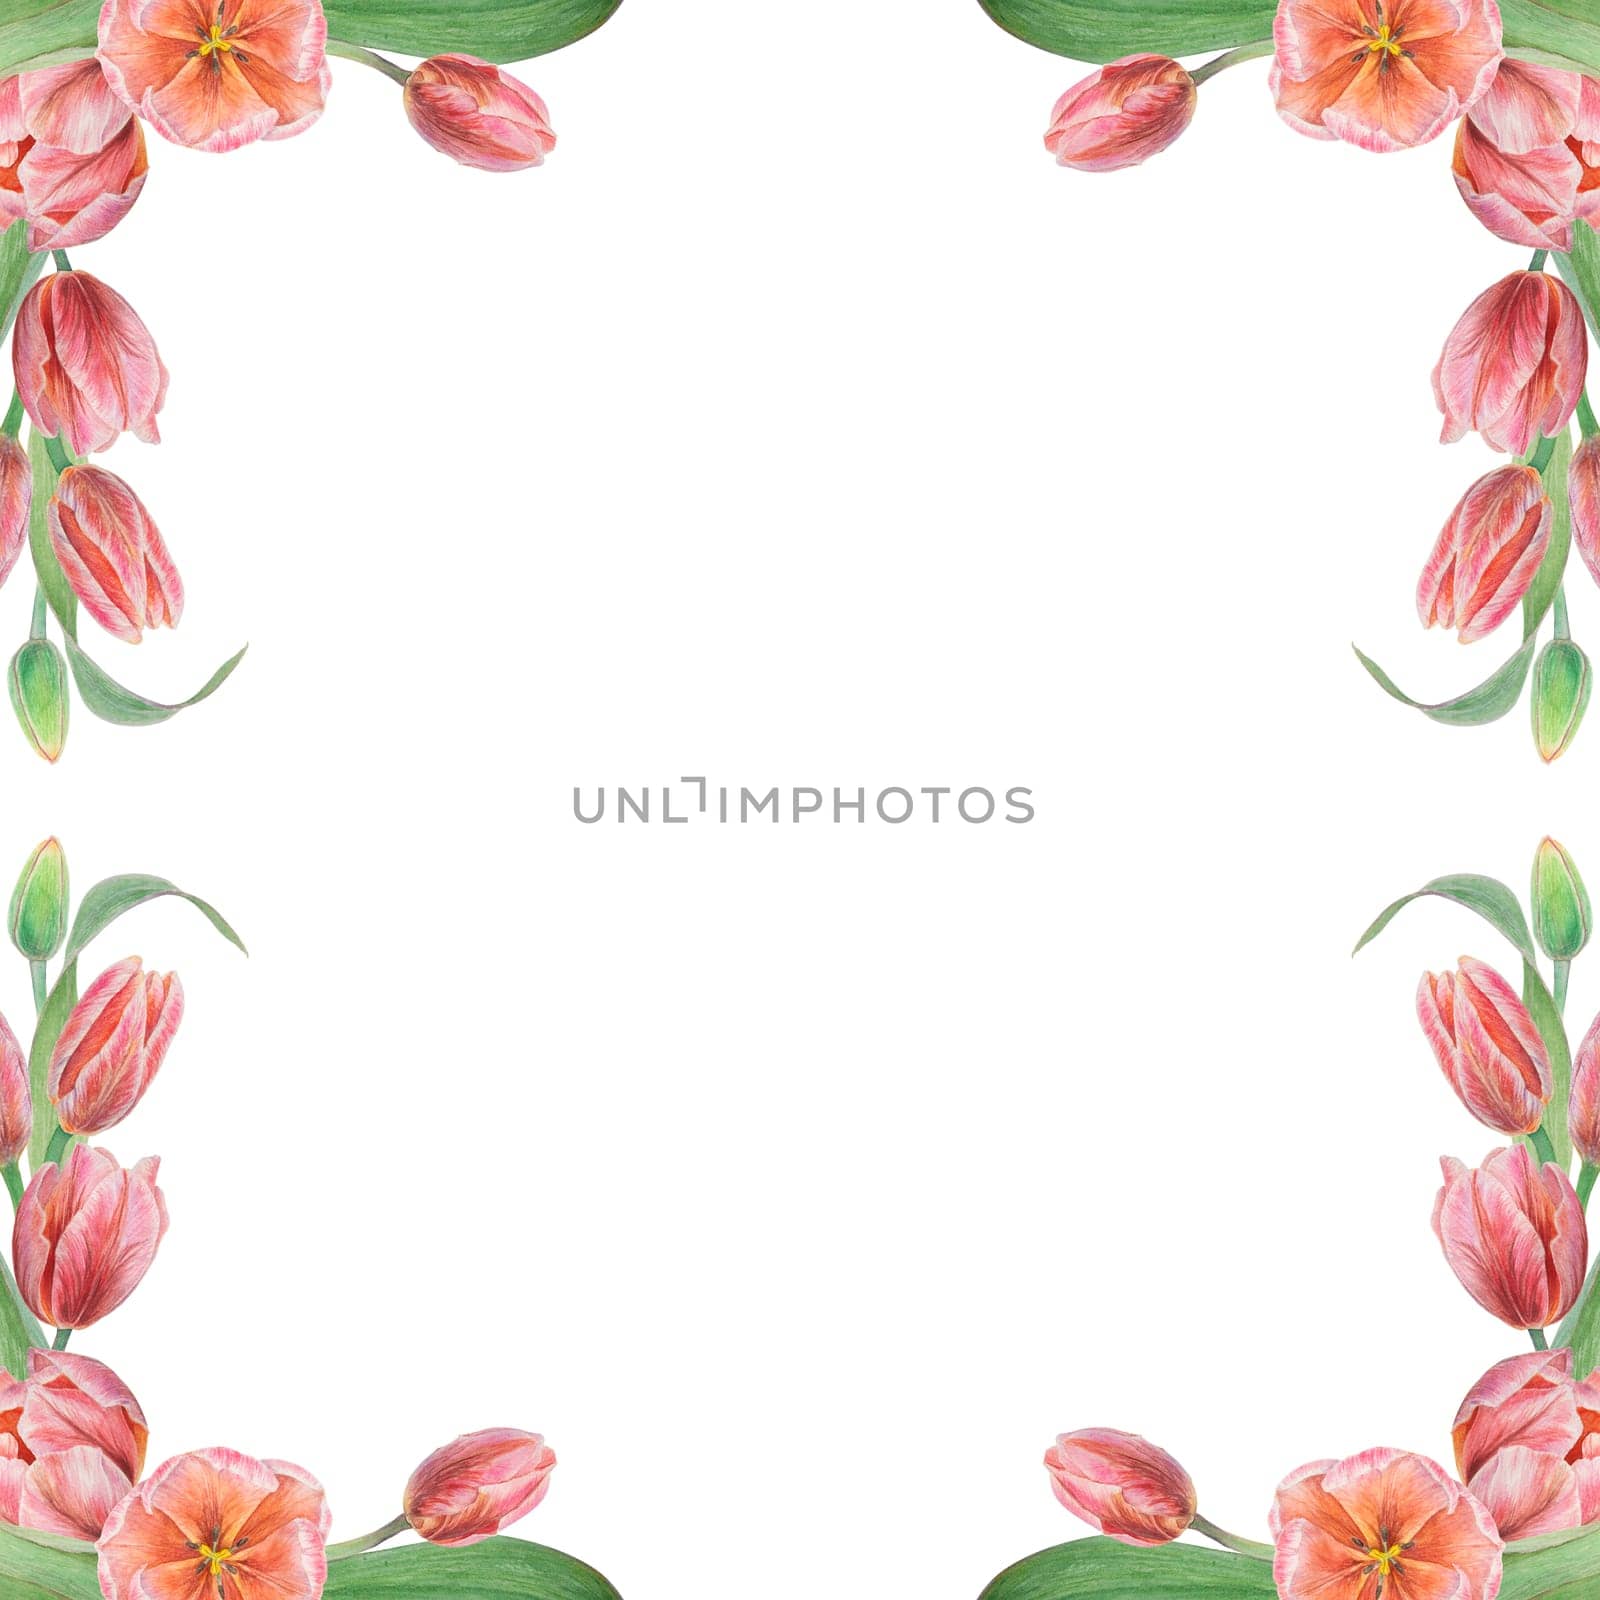 Watercolor realistic botanical illustration of pink tulips frame isolated on white background for your design, wedding print products, paper, invitations, cards, fabric, posters by florainlove_art